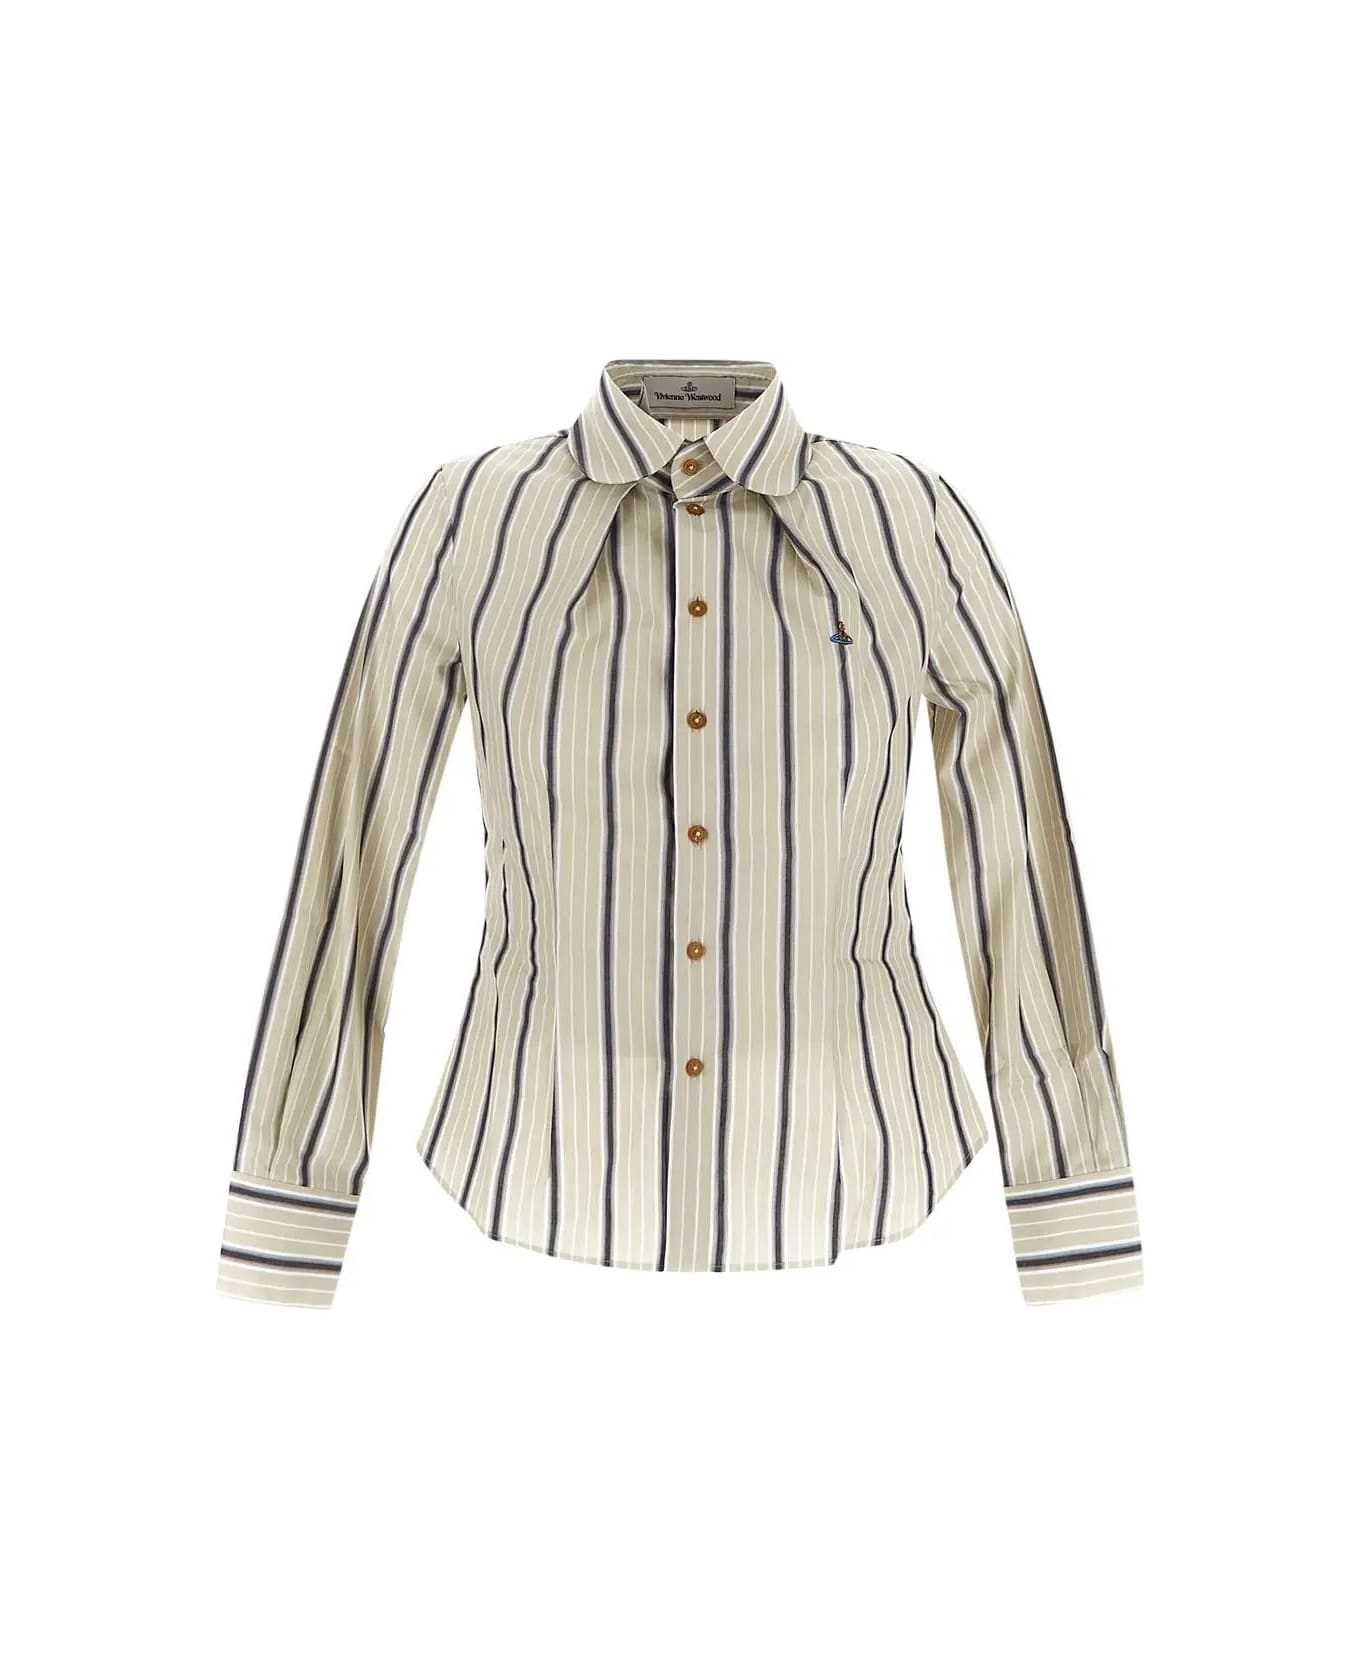 Vivienne Westwood Toulouse Shirt - GREEN